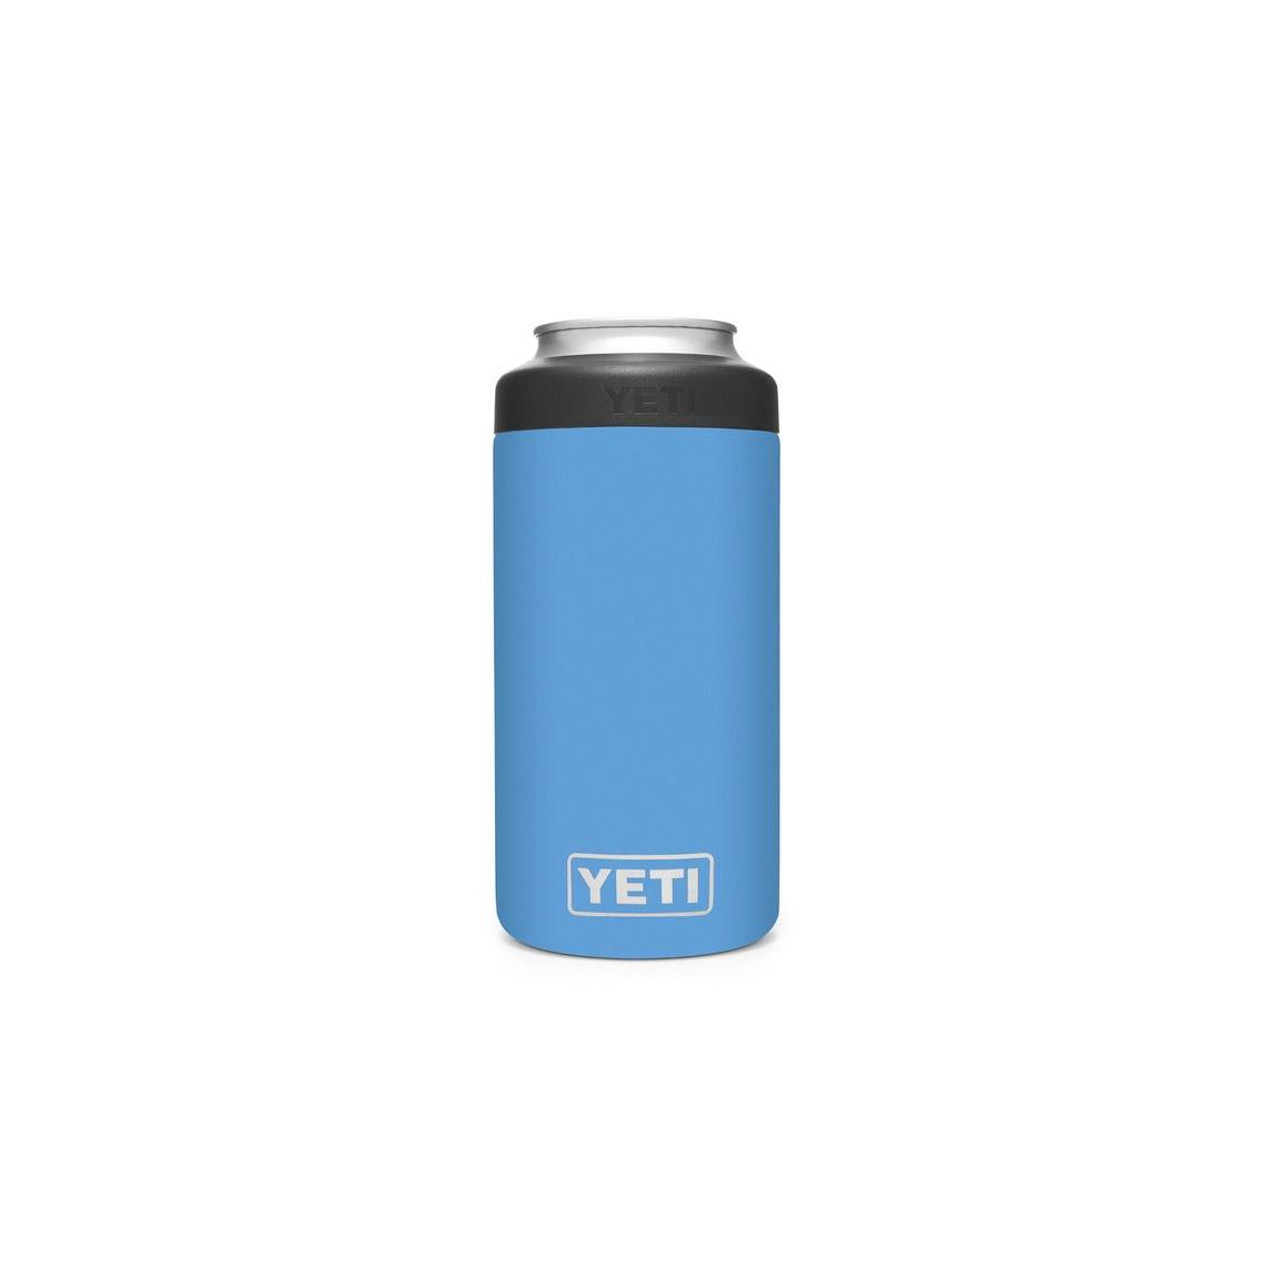 https://cdn11.bigcommerce.com/s-stfpjhht/images/stencil/1280x1280/products/19914/38615/Yeti-Rambler-16-Oz-Colster-Tall-Can-Insulator-888830065426_image1__04074.1586294059.jpg?c=2